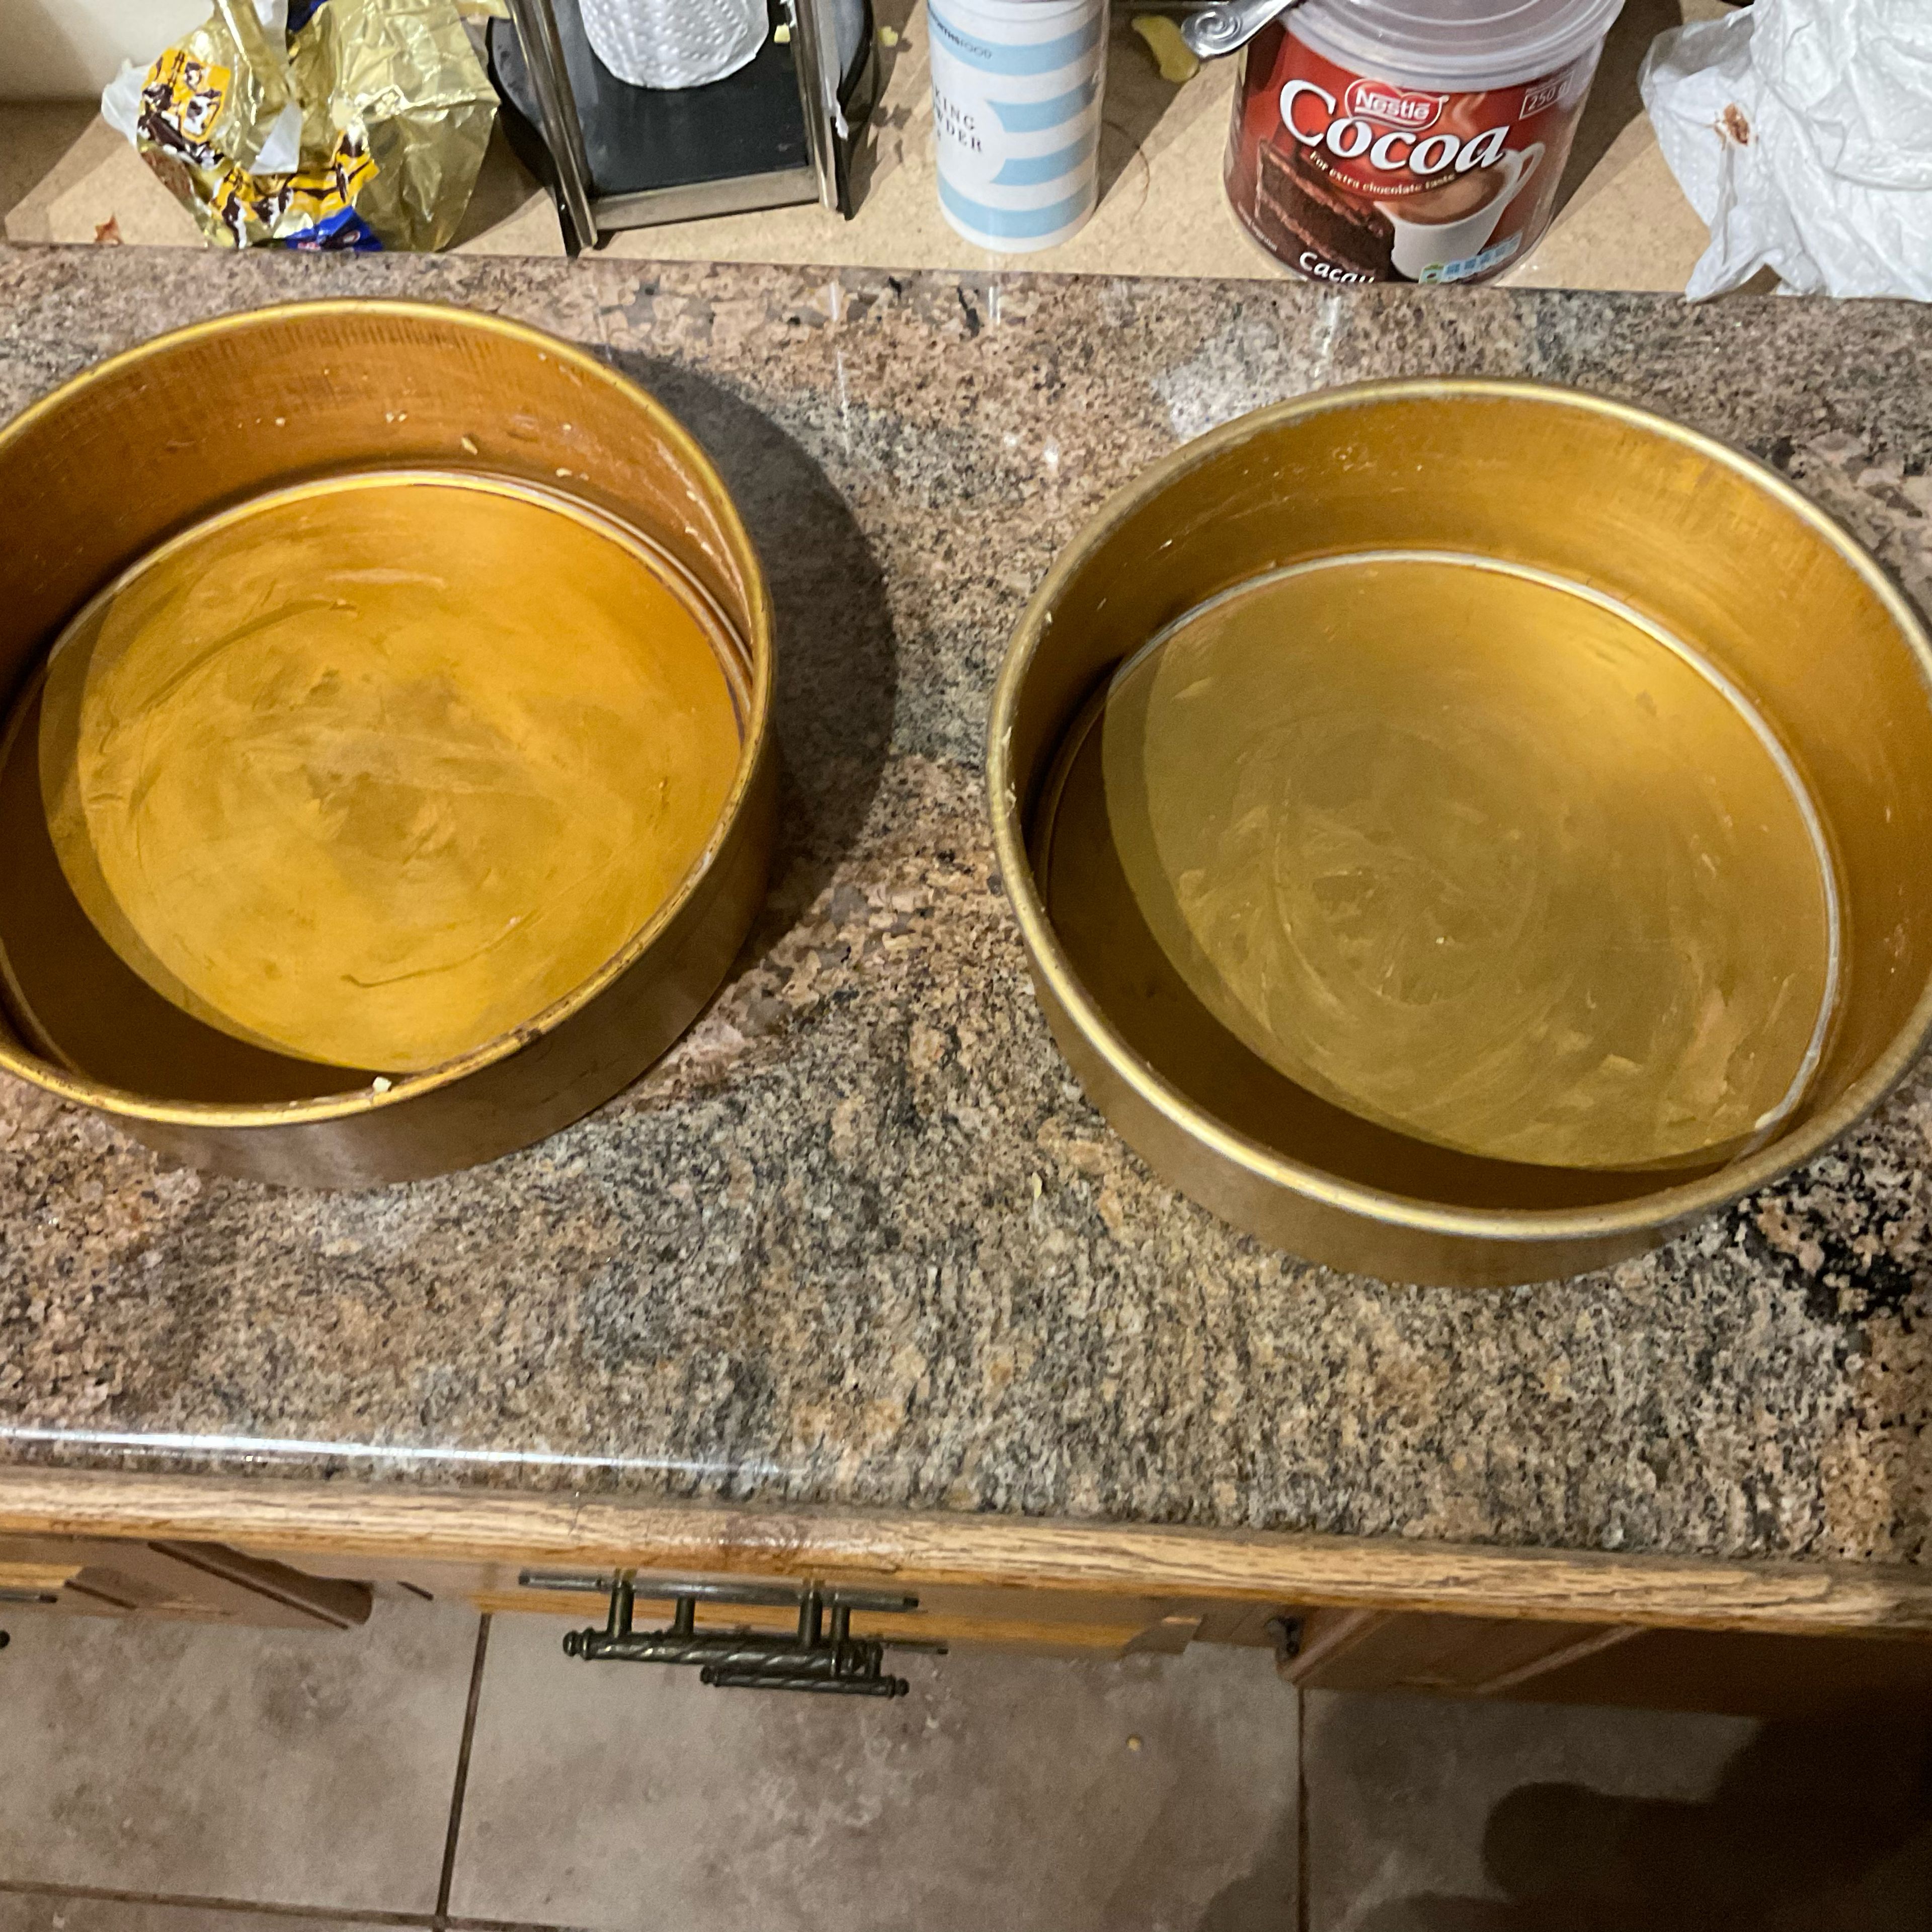 Grease the cake pans with butter